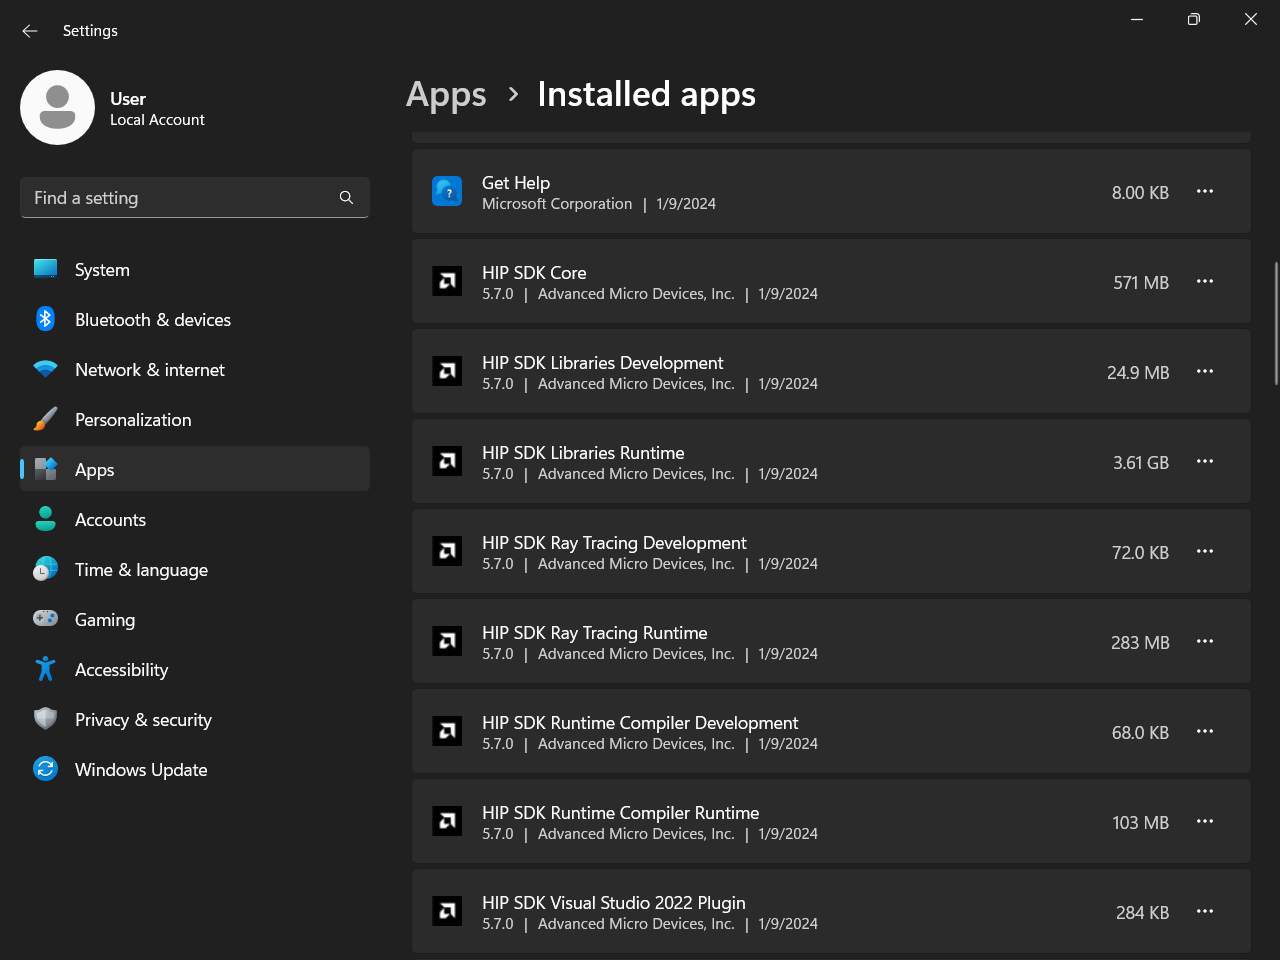 Installed apps section of the settings app showing installed HIP SDK components